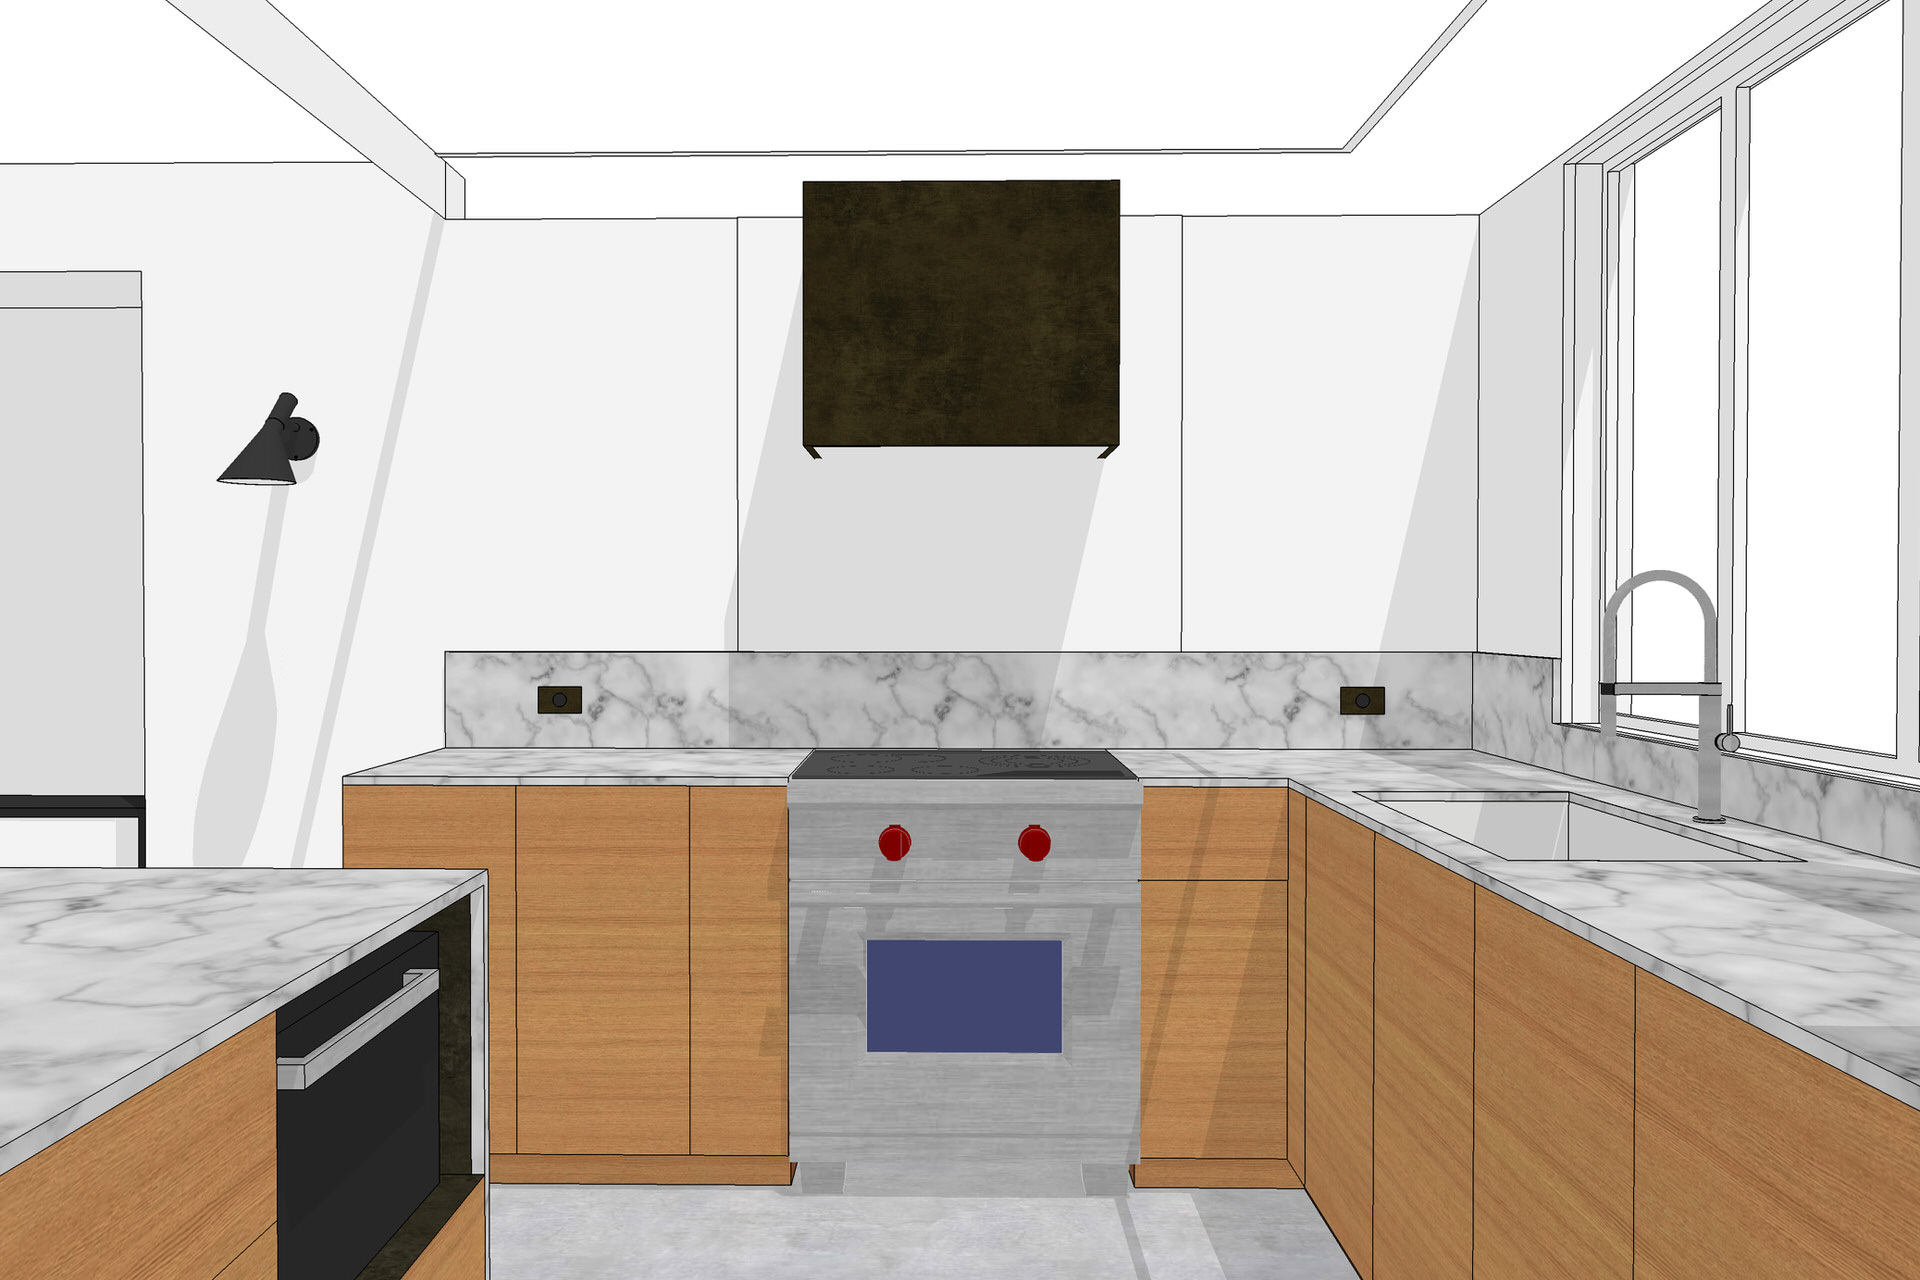 Comparison of SketchUp model and kitchen after